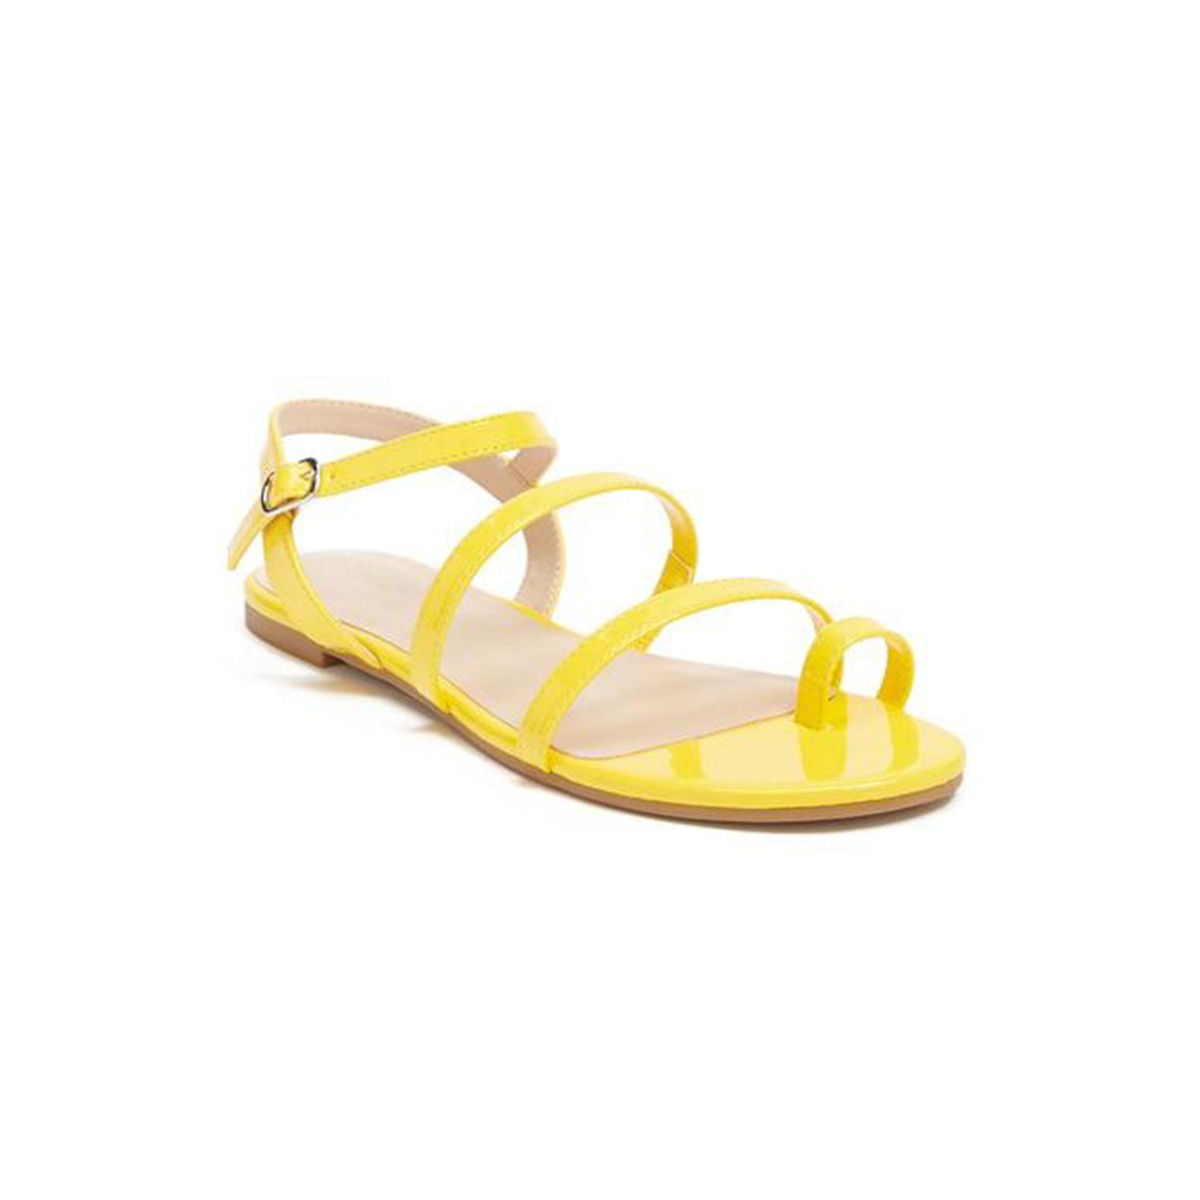 Get Strappy Heel Yellow Sandals at ₹ 799 | LBB Shop